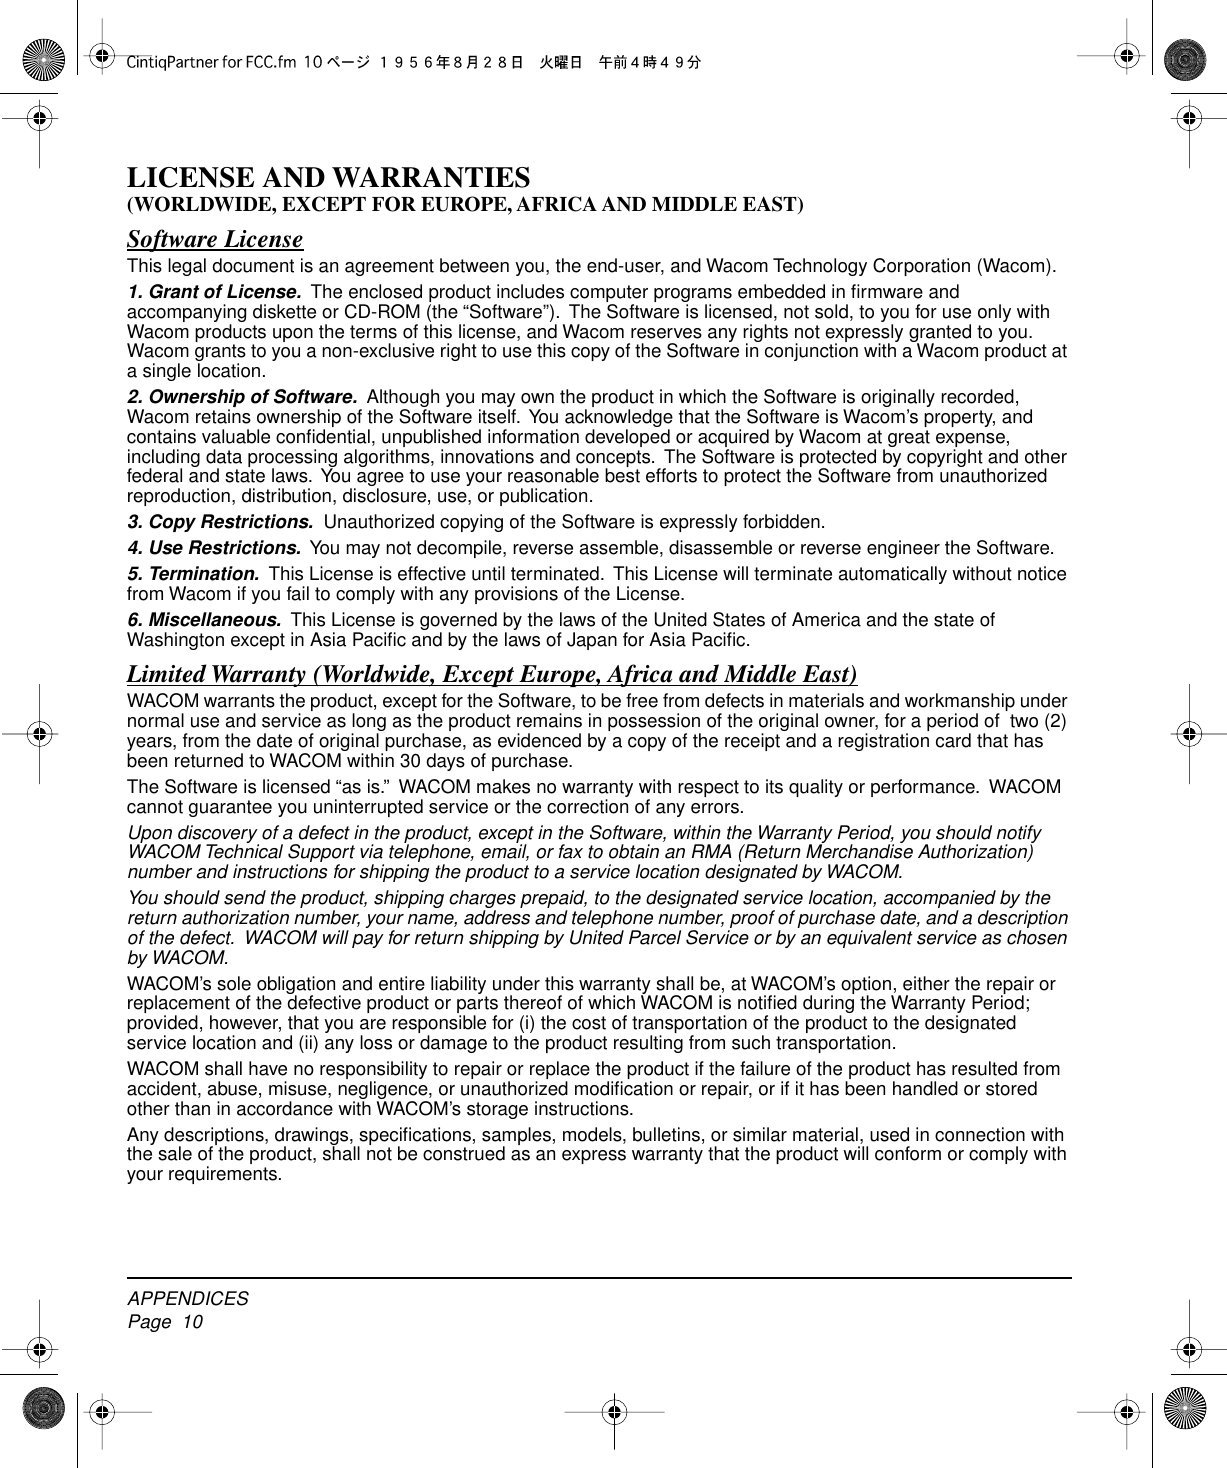  APPENDICESPage  10 LICENSE AND WARRANTIES (WORLDWIDE, EXCEPT FOR EUROPE, AFRICA AND MIDDLE EAST) Software License This legal document is an agreement between you, the end-user, and Wacom Technology Corporation (Wacom). 1. Grant of License.   The enclosed product includes computer programs embedded in ﬁrmware and accompanying diskette or CD-ROM (the “Software”).  The Software is licensed, not sold, to you for use only with Wacom products upon the terms of this license, and Wacom reserves any rights not expressly granted to you.   Wacom grants to you a non-exclusive right to use this copy of the Software in conjunction with a Wacom product at a single location. 2. Ownership of Software.   Although you may own the product in which the Software is originally recorded, Wacom retains ownership of the Software itself.  You acknowledge that the Software is Wacom’s property, and contains valuable conﬁdential, unpublished information developed or acquired by Wacom at great expense, including data processing algorithms, innovations and concepts.  The Software is protected by copyright and other federal and state laws.  You agree to use your reasonable best efforts to protect the Software from unauthorized reproduction, distribution, disclosure, use, or publication. 3. Copy Restrictions.   Unauthorized copying of the Software is expressly forbidden. 4. Use Restrictions.   You may not decompile, reverse assemble, disassemble or reverse engineer the Software. 5. Termination.   This License is effective until terminated.  This License will terminate automatically without notice from Wacom if you fail to comply with any provisions of the License. 6. Miscellaneous.   This License is governed by the laws of the United States of America and the state of Washington except in Asia Paciﬁc and by the laws of Japan for Asia Paciﬁc. Limited Warranty (Worldwide, Except Europe, Africa and Middle East) WACOM warrants the product, except for the Software, to be free from defects in materials and workmanship under normal use and service as long as the product remains in possession of the original owner, for a period of  two (2) years, from the date of original purchase, as evidenced by a copy of the receipt and a registration card that has been returned to WACOM within 30 days of purchase.The Software is licensed “as is.”  WACOM makes no warranty with respect to its quality or performance.  WACOM cannot guarantee you uninterrupted service or the correction of any errors. Upon discovery of a defect in the product, except in the Software, within the Warranty Period, you should notify WACOM Technical Support via telephone, email, or fax to obtain an RMA (Return Merchandise Authorization) number and instructions for shipping the product to a service location designated by WACOM.You should send the product, shipping charges prepaid, to the designated service location, accompanied by the return authorization number, your name, address and telephone number, proof of purchase date, and a description of the defect.  WACOM will pay for return shipping by United Parcel Service or by an equivalent service as chosen by WACOM. WACOM’s sole obligation and entire liability under this warranty shall be, at WACOM’s option, either the repair or replacement of the defective product or parts thereof of which WACOM is notiﬁed during the Warranty Period; provided, however, that you are responsible for (i) the cost of transportation of the product to the designated service location and (ii) any loss or damage to the product resulting from such transportation.WACOM shall have no responsibility to repair or replace the product if the failure of the product has resulted from accident, abuse, misuse, negligence, or unauthorized modiﬁcation or repair, or if it has been handled or stored other than in accordance with WACOM’s storage instructions.Any descriptions, drawings, speciﬁcations, samples, models, bulletins, or similar material, used in connection with the sale of the product, shall not be construed as an express warranty that the product will conform or comply with your requirements.